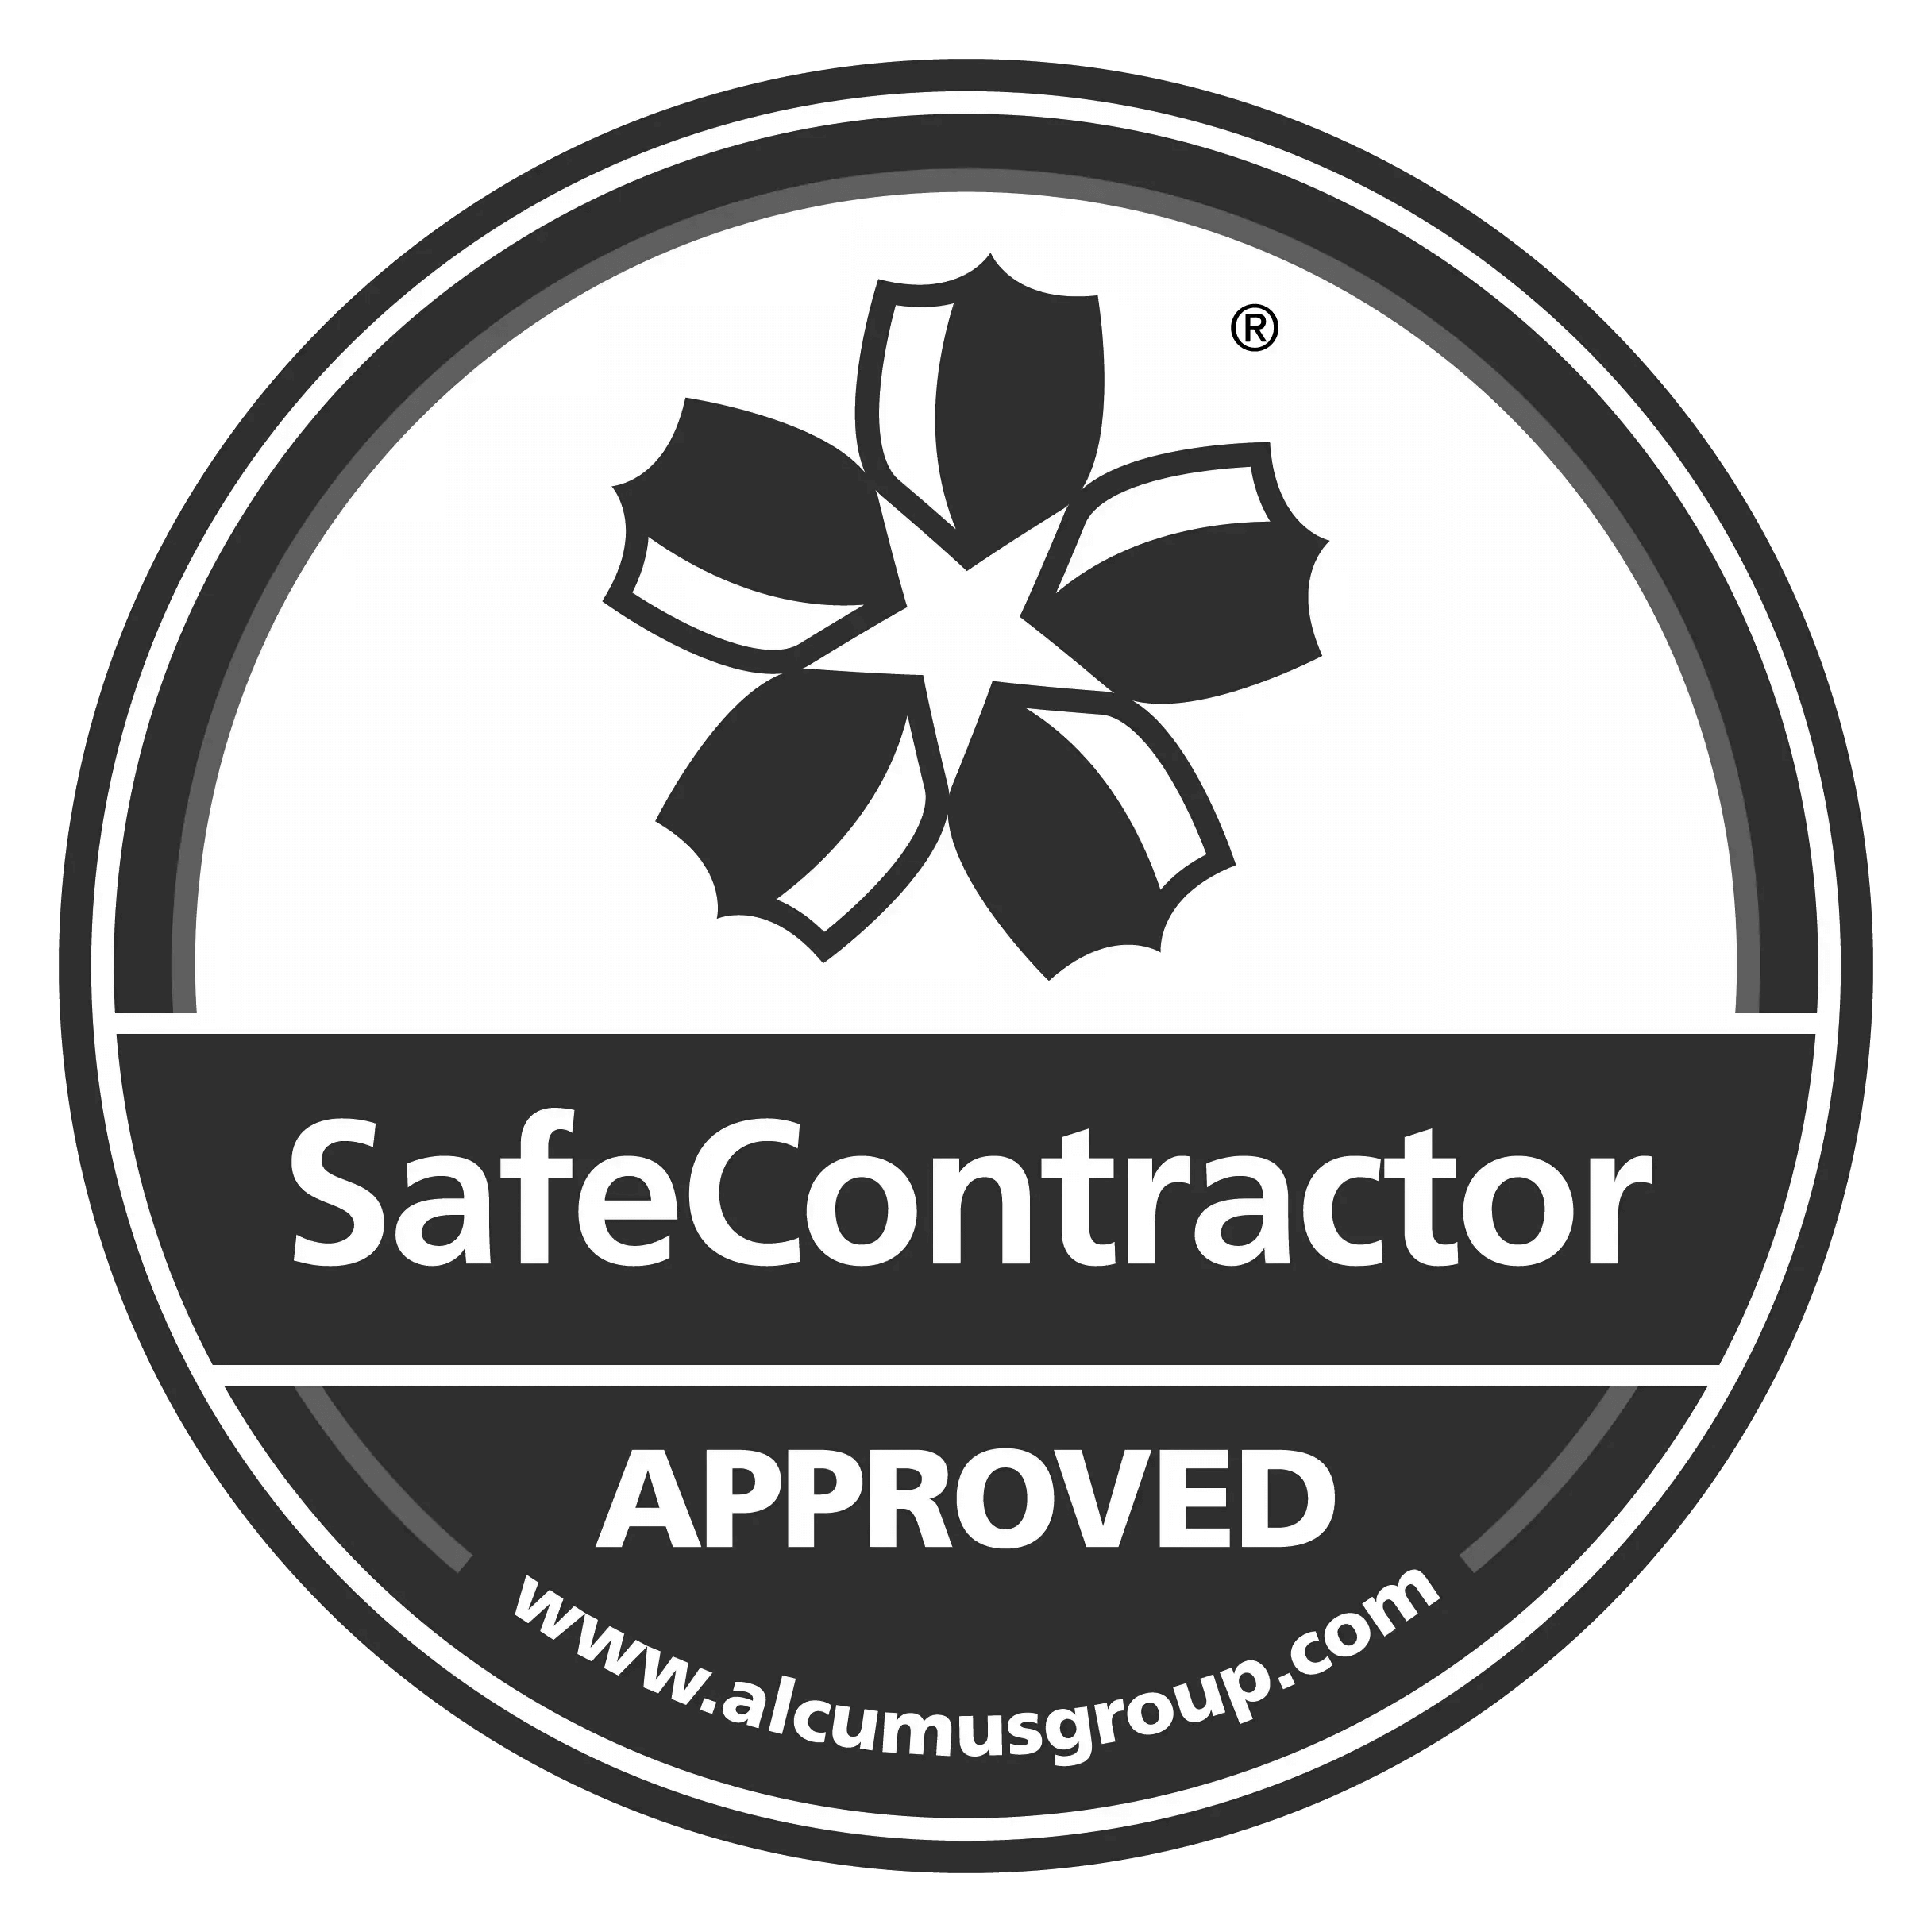 Rope Access - SafeContractor approved logo